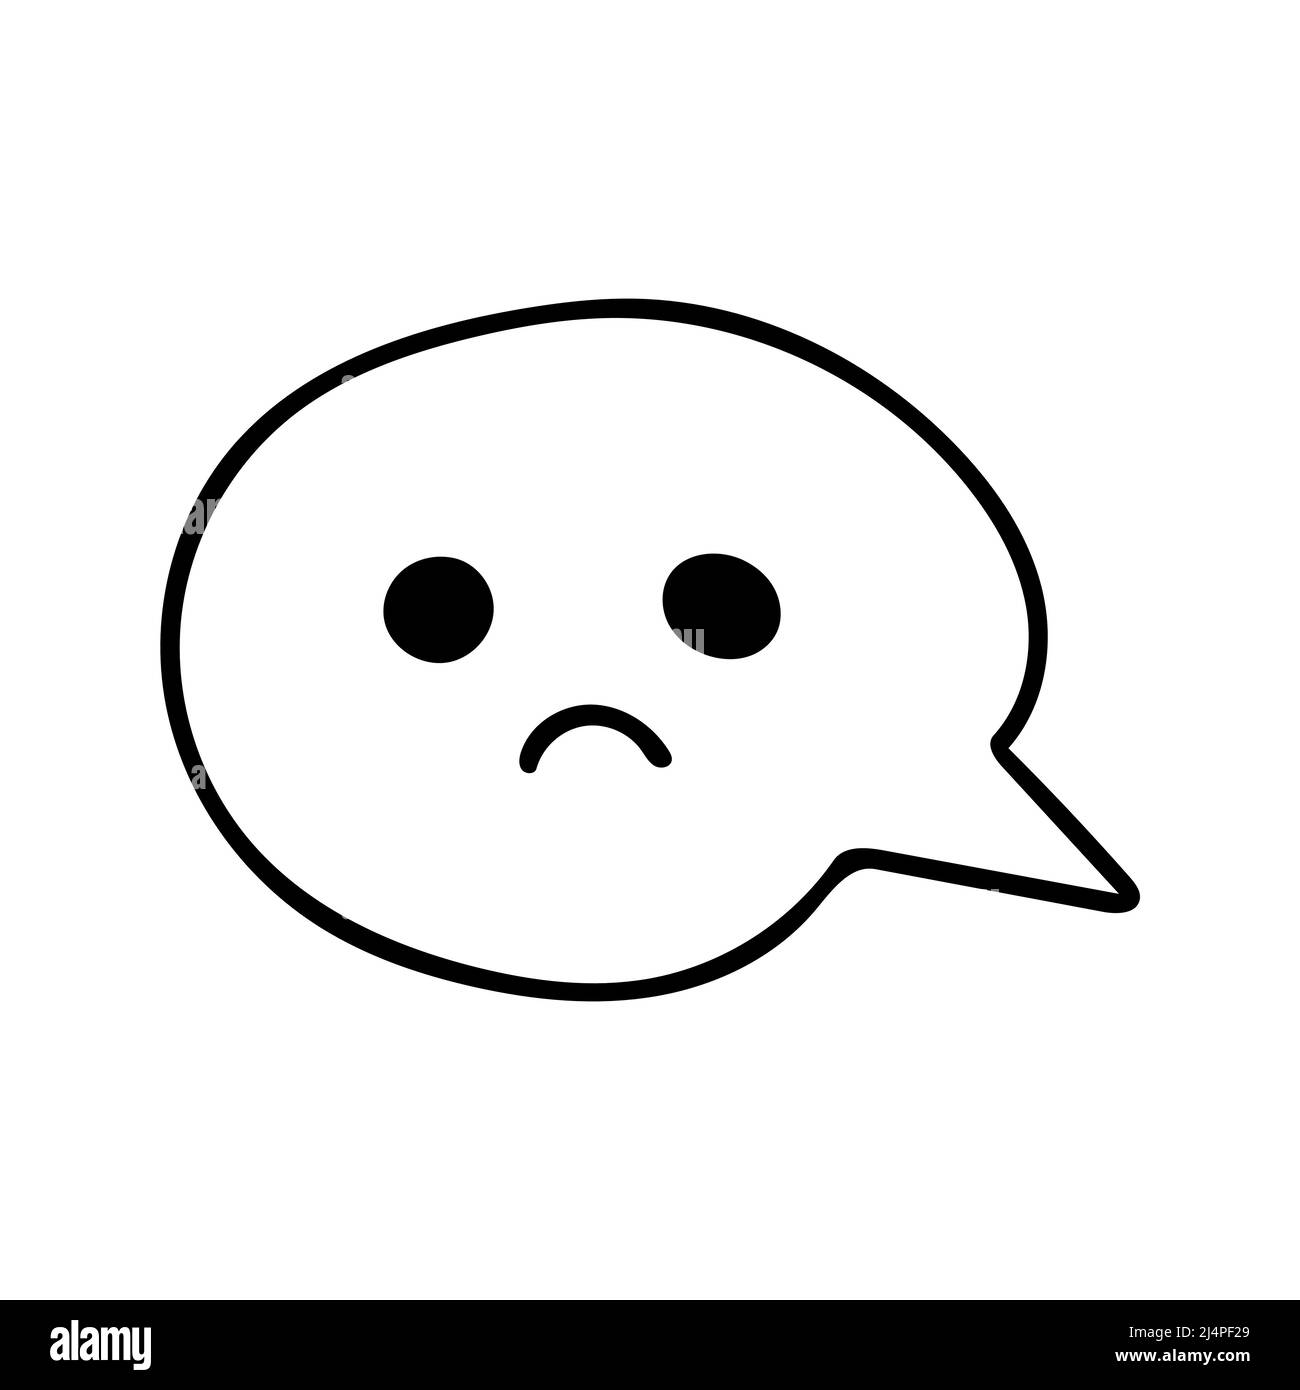 Sad thoughts bubble line art icon. Depressed mental state, therapy treatment concept, simple unhappiness logo Stock Vector